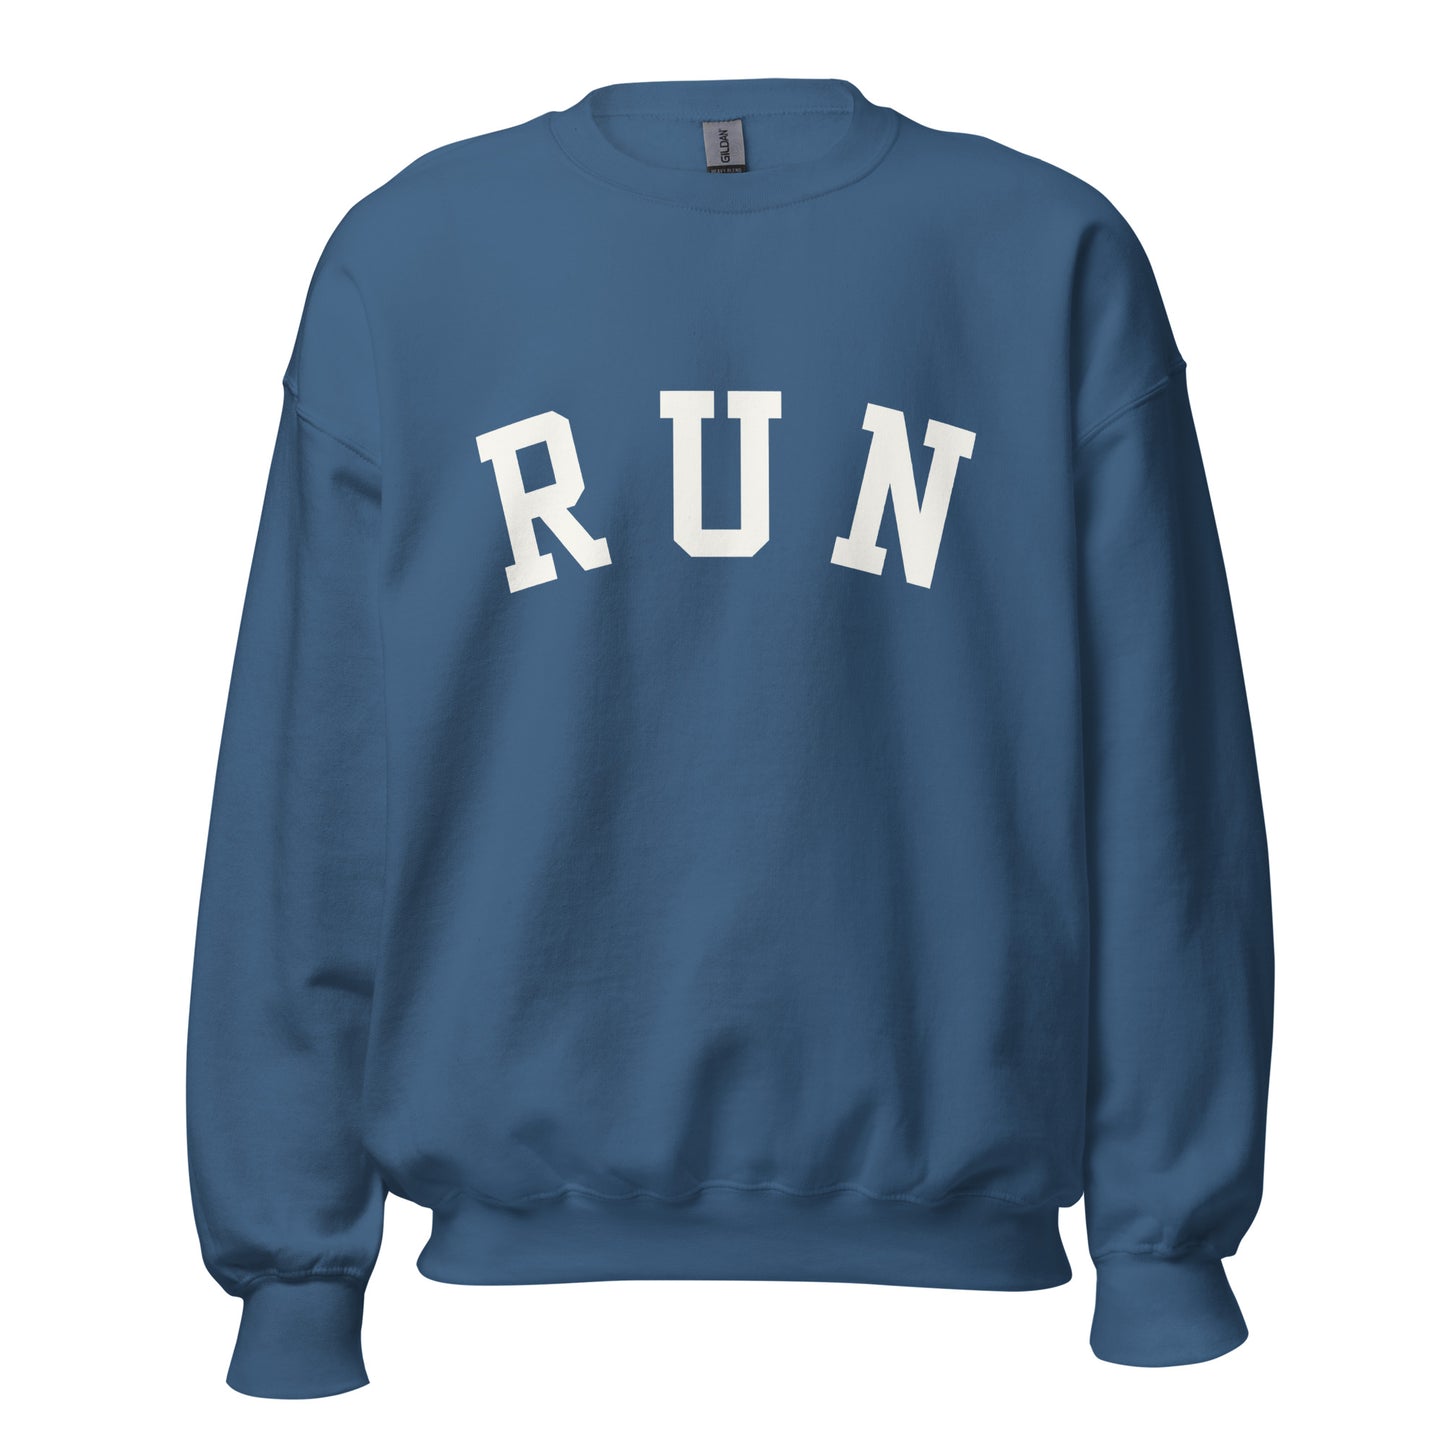 blue unisex sweatshirt with the word run across the chest in a white bold varsity style font